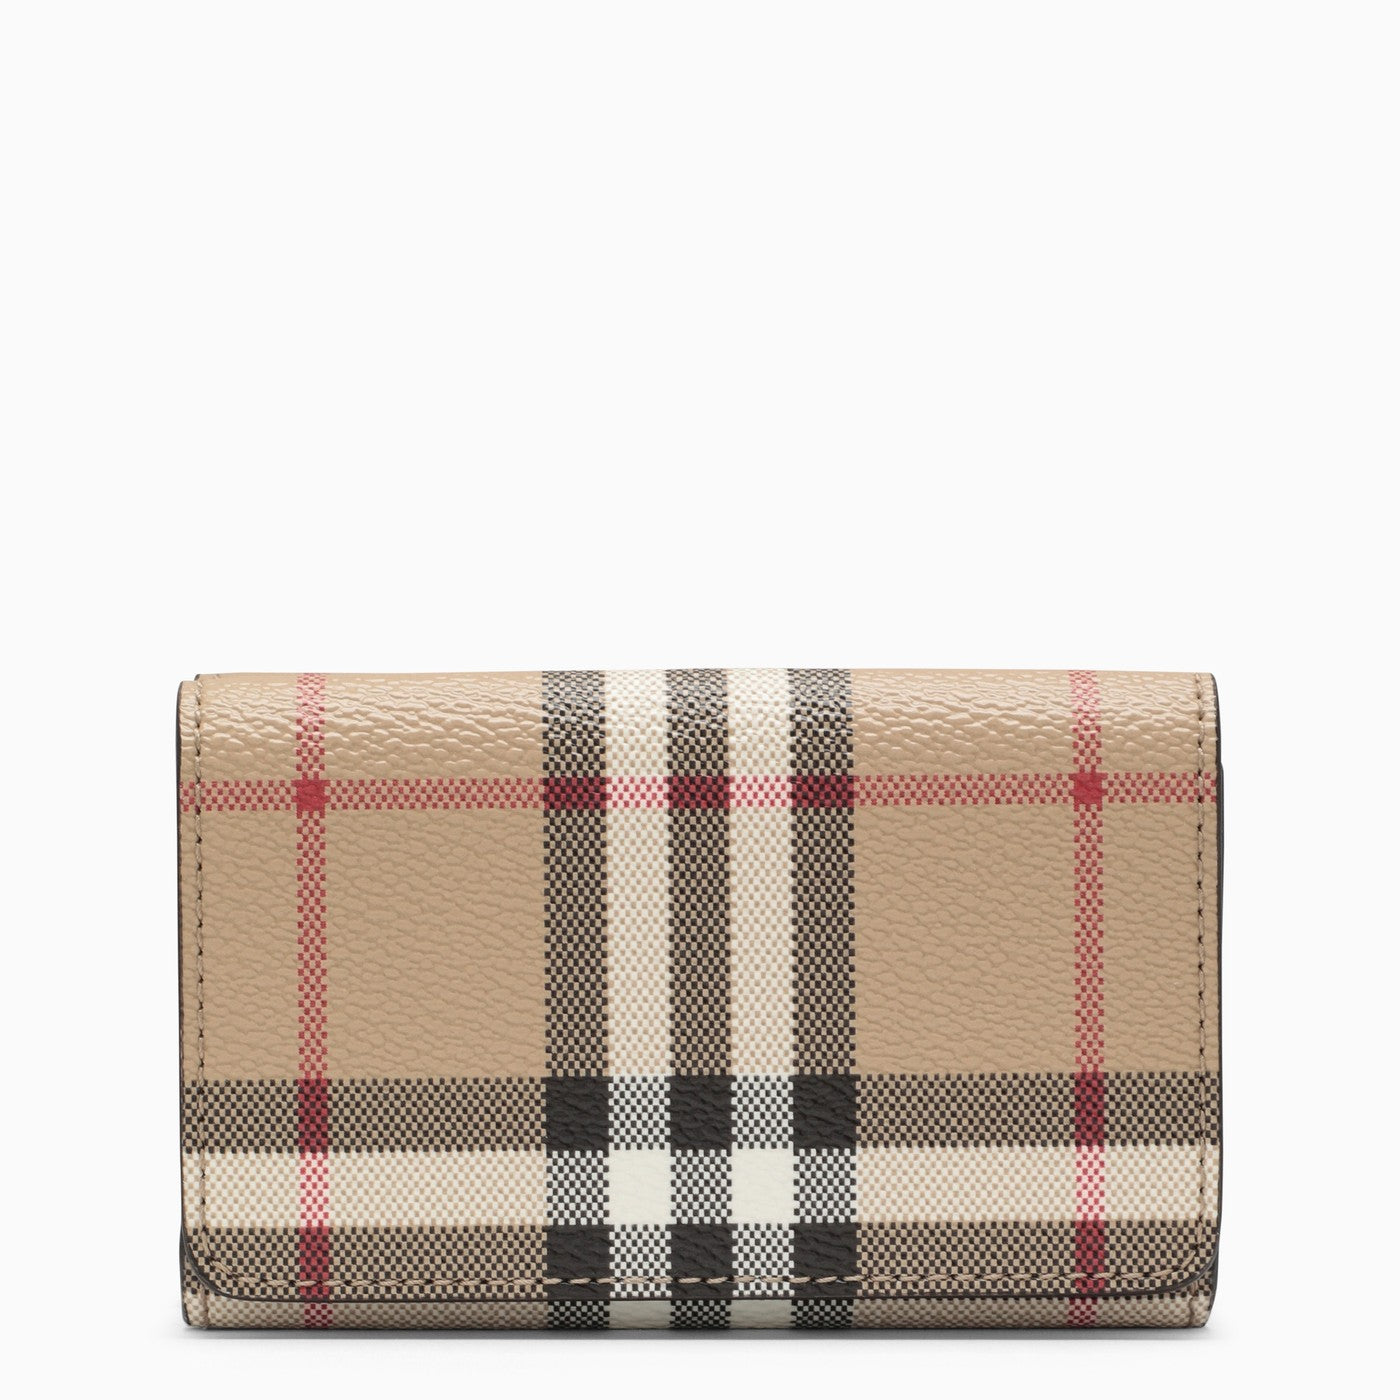 Burberry Check Pattern Wallet